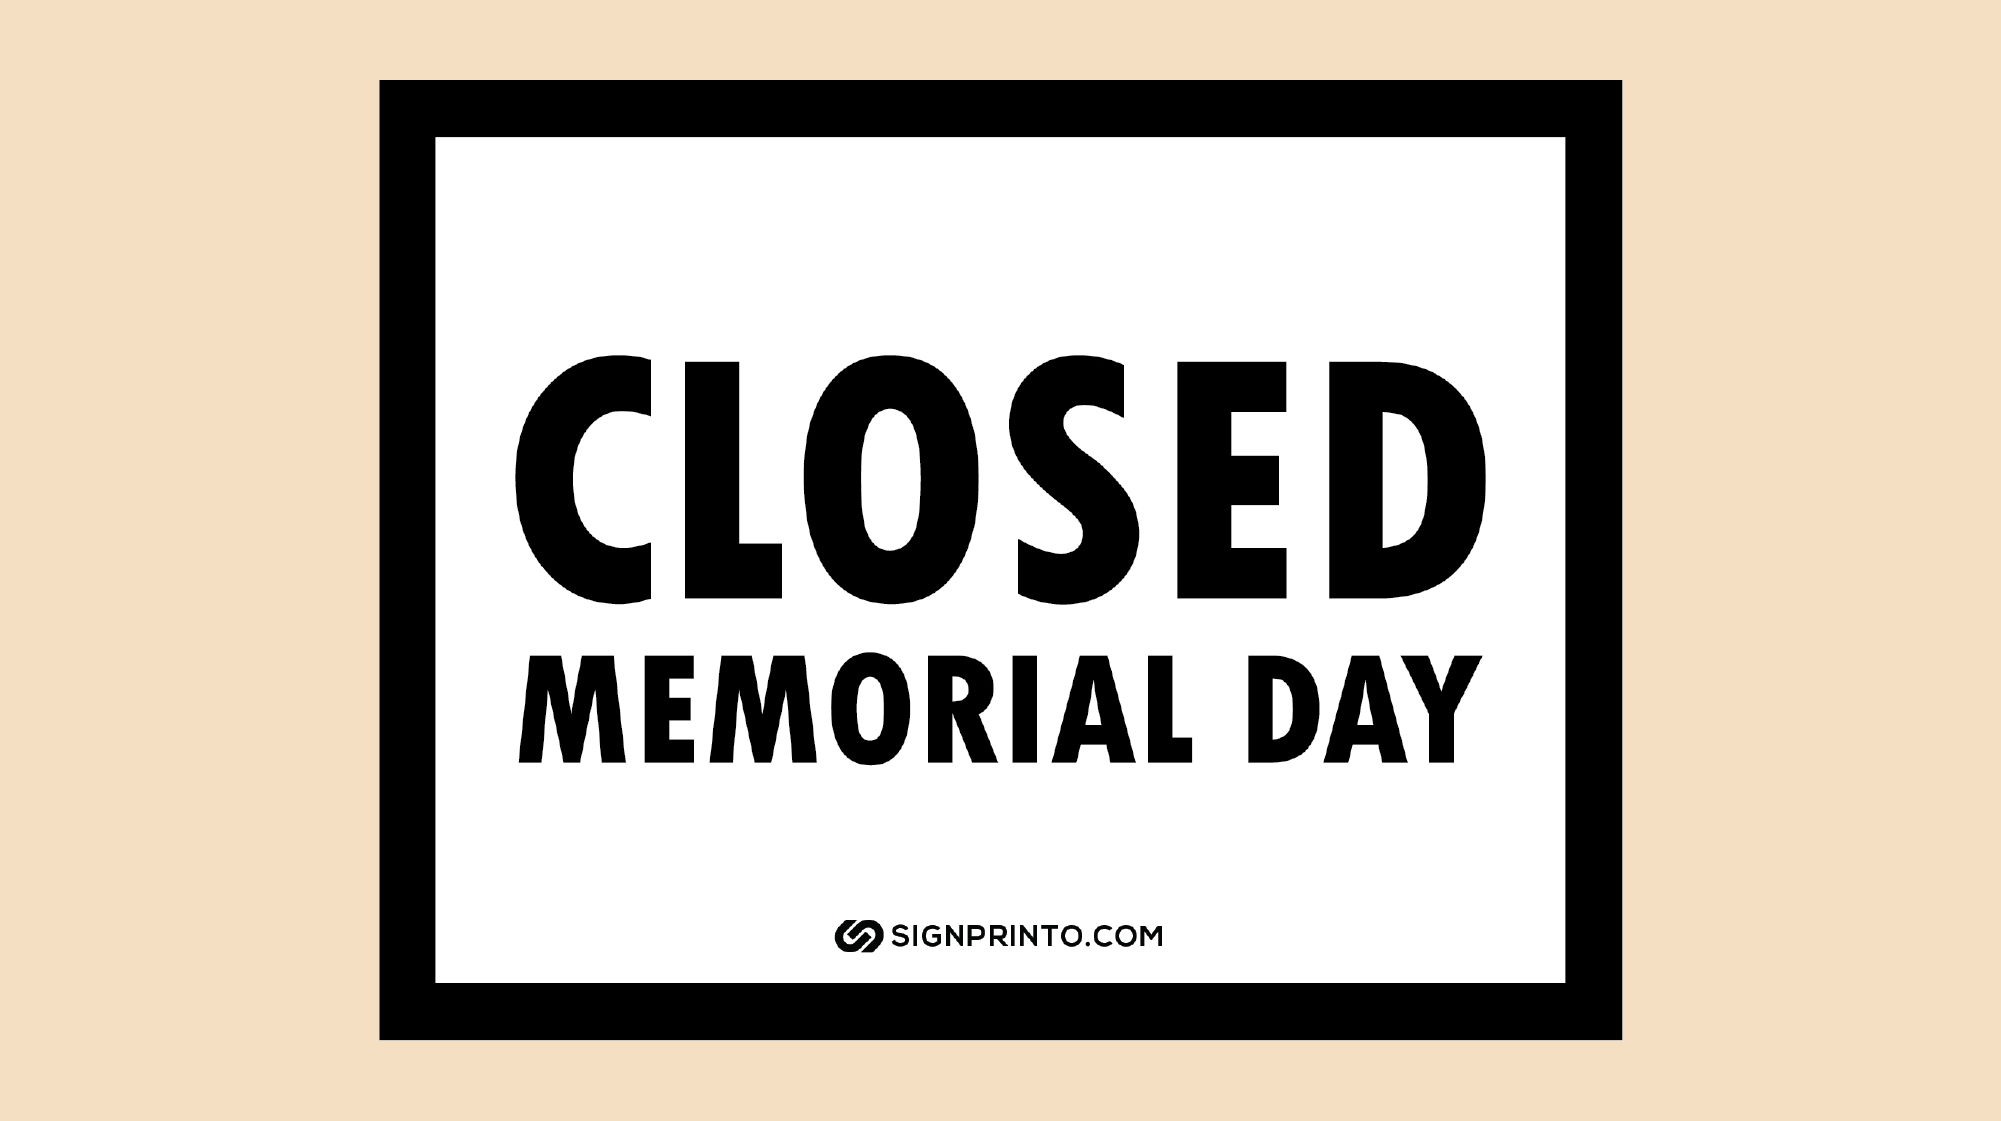 Memorial Day Closed Sign PDF - Your Key to Closure Success!